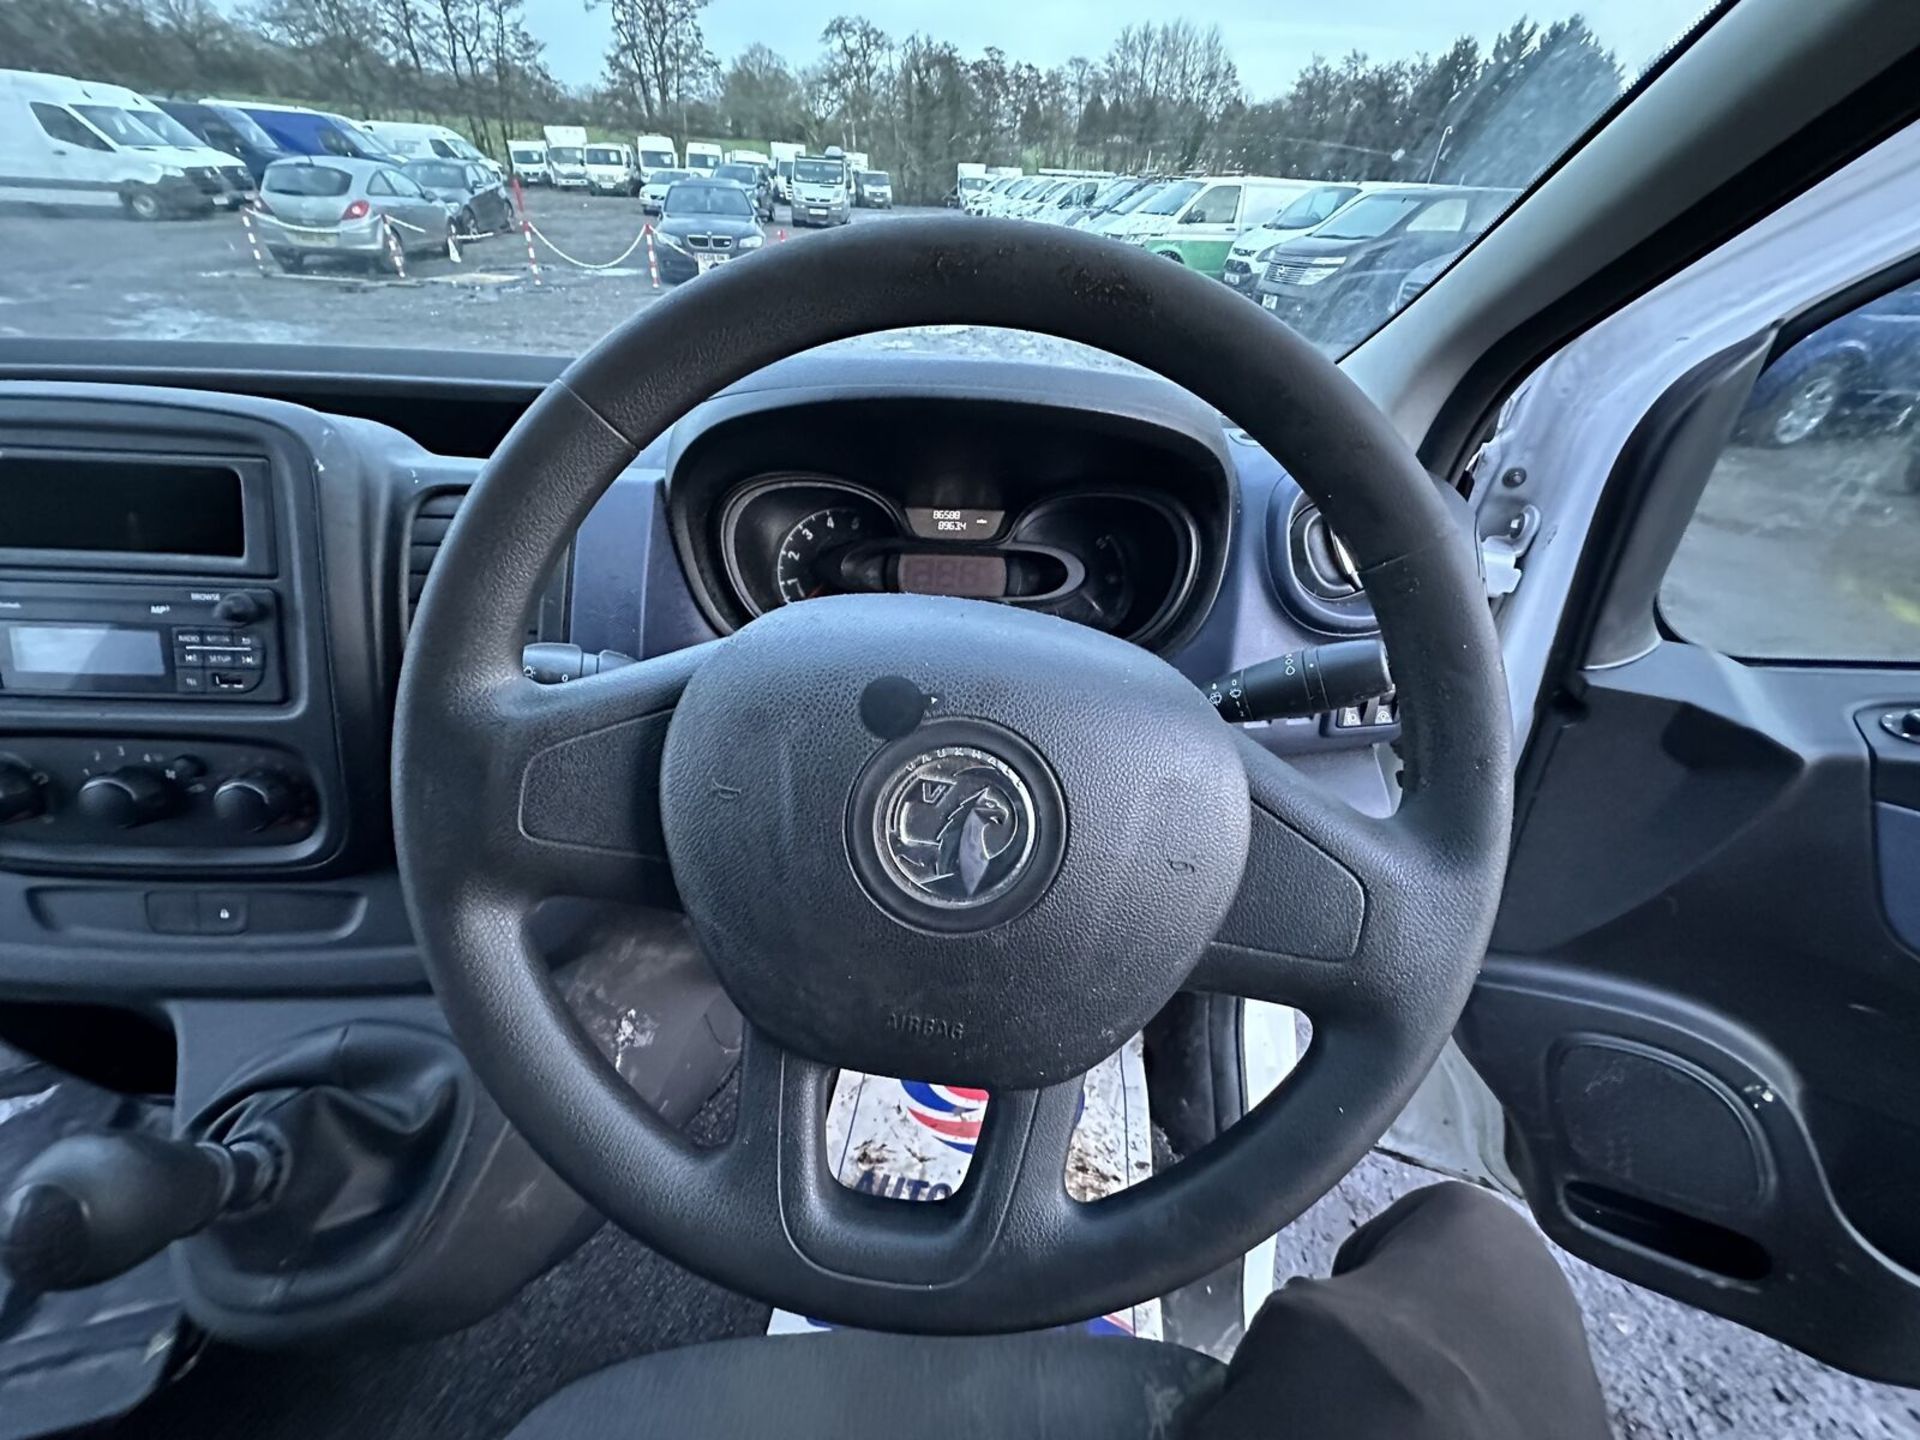 AFFORDABLE REPAIR: VAUXHALL VIVARO WITH POTENTIAL - Image 20 of 21